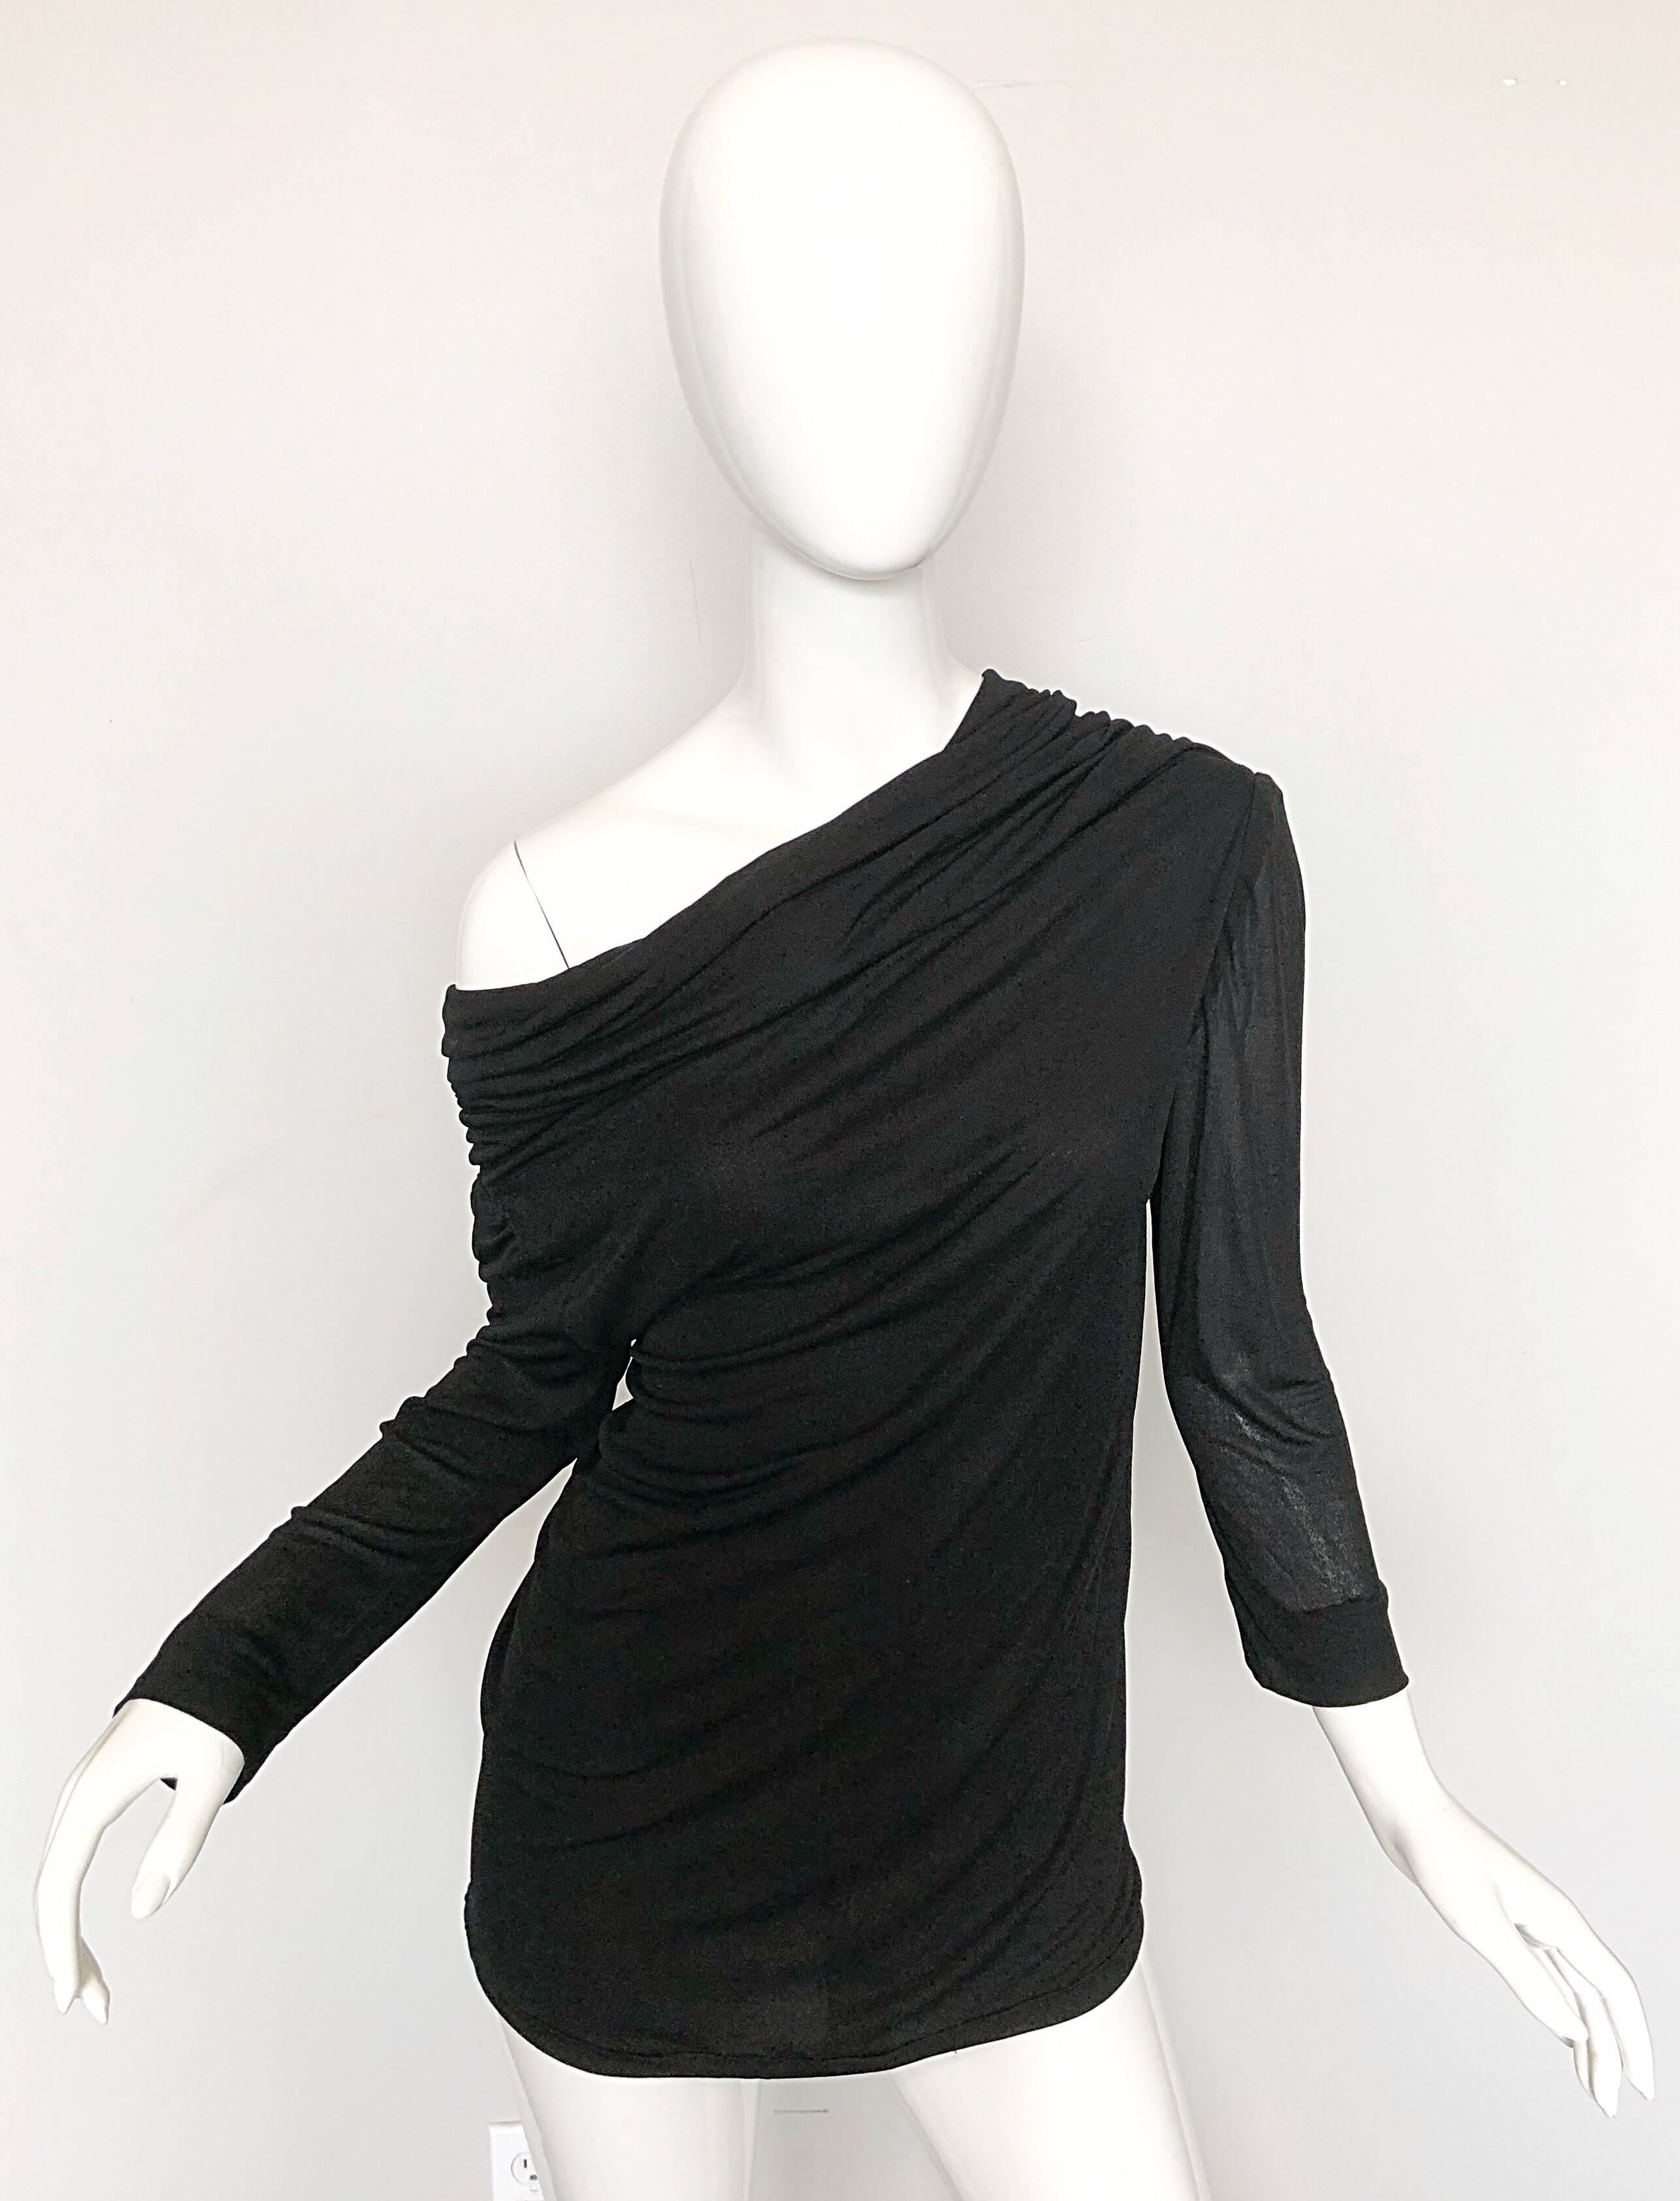 Amazing vintage 70s CARDINALI COUTURE black silk jersey blouse! From the Spring 1972 Runway Collection. This versatile gem can be worm three different ways :
-off-the-shoulder
-one shoulder 
-scoop neck 
Approximately Size Small -